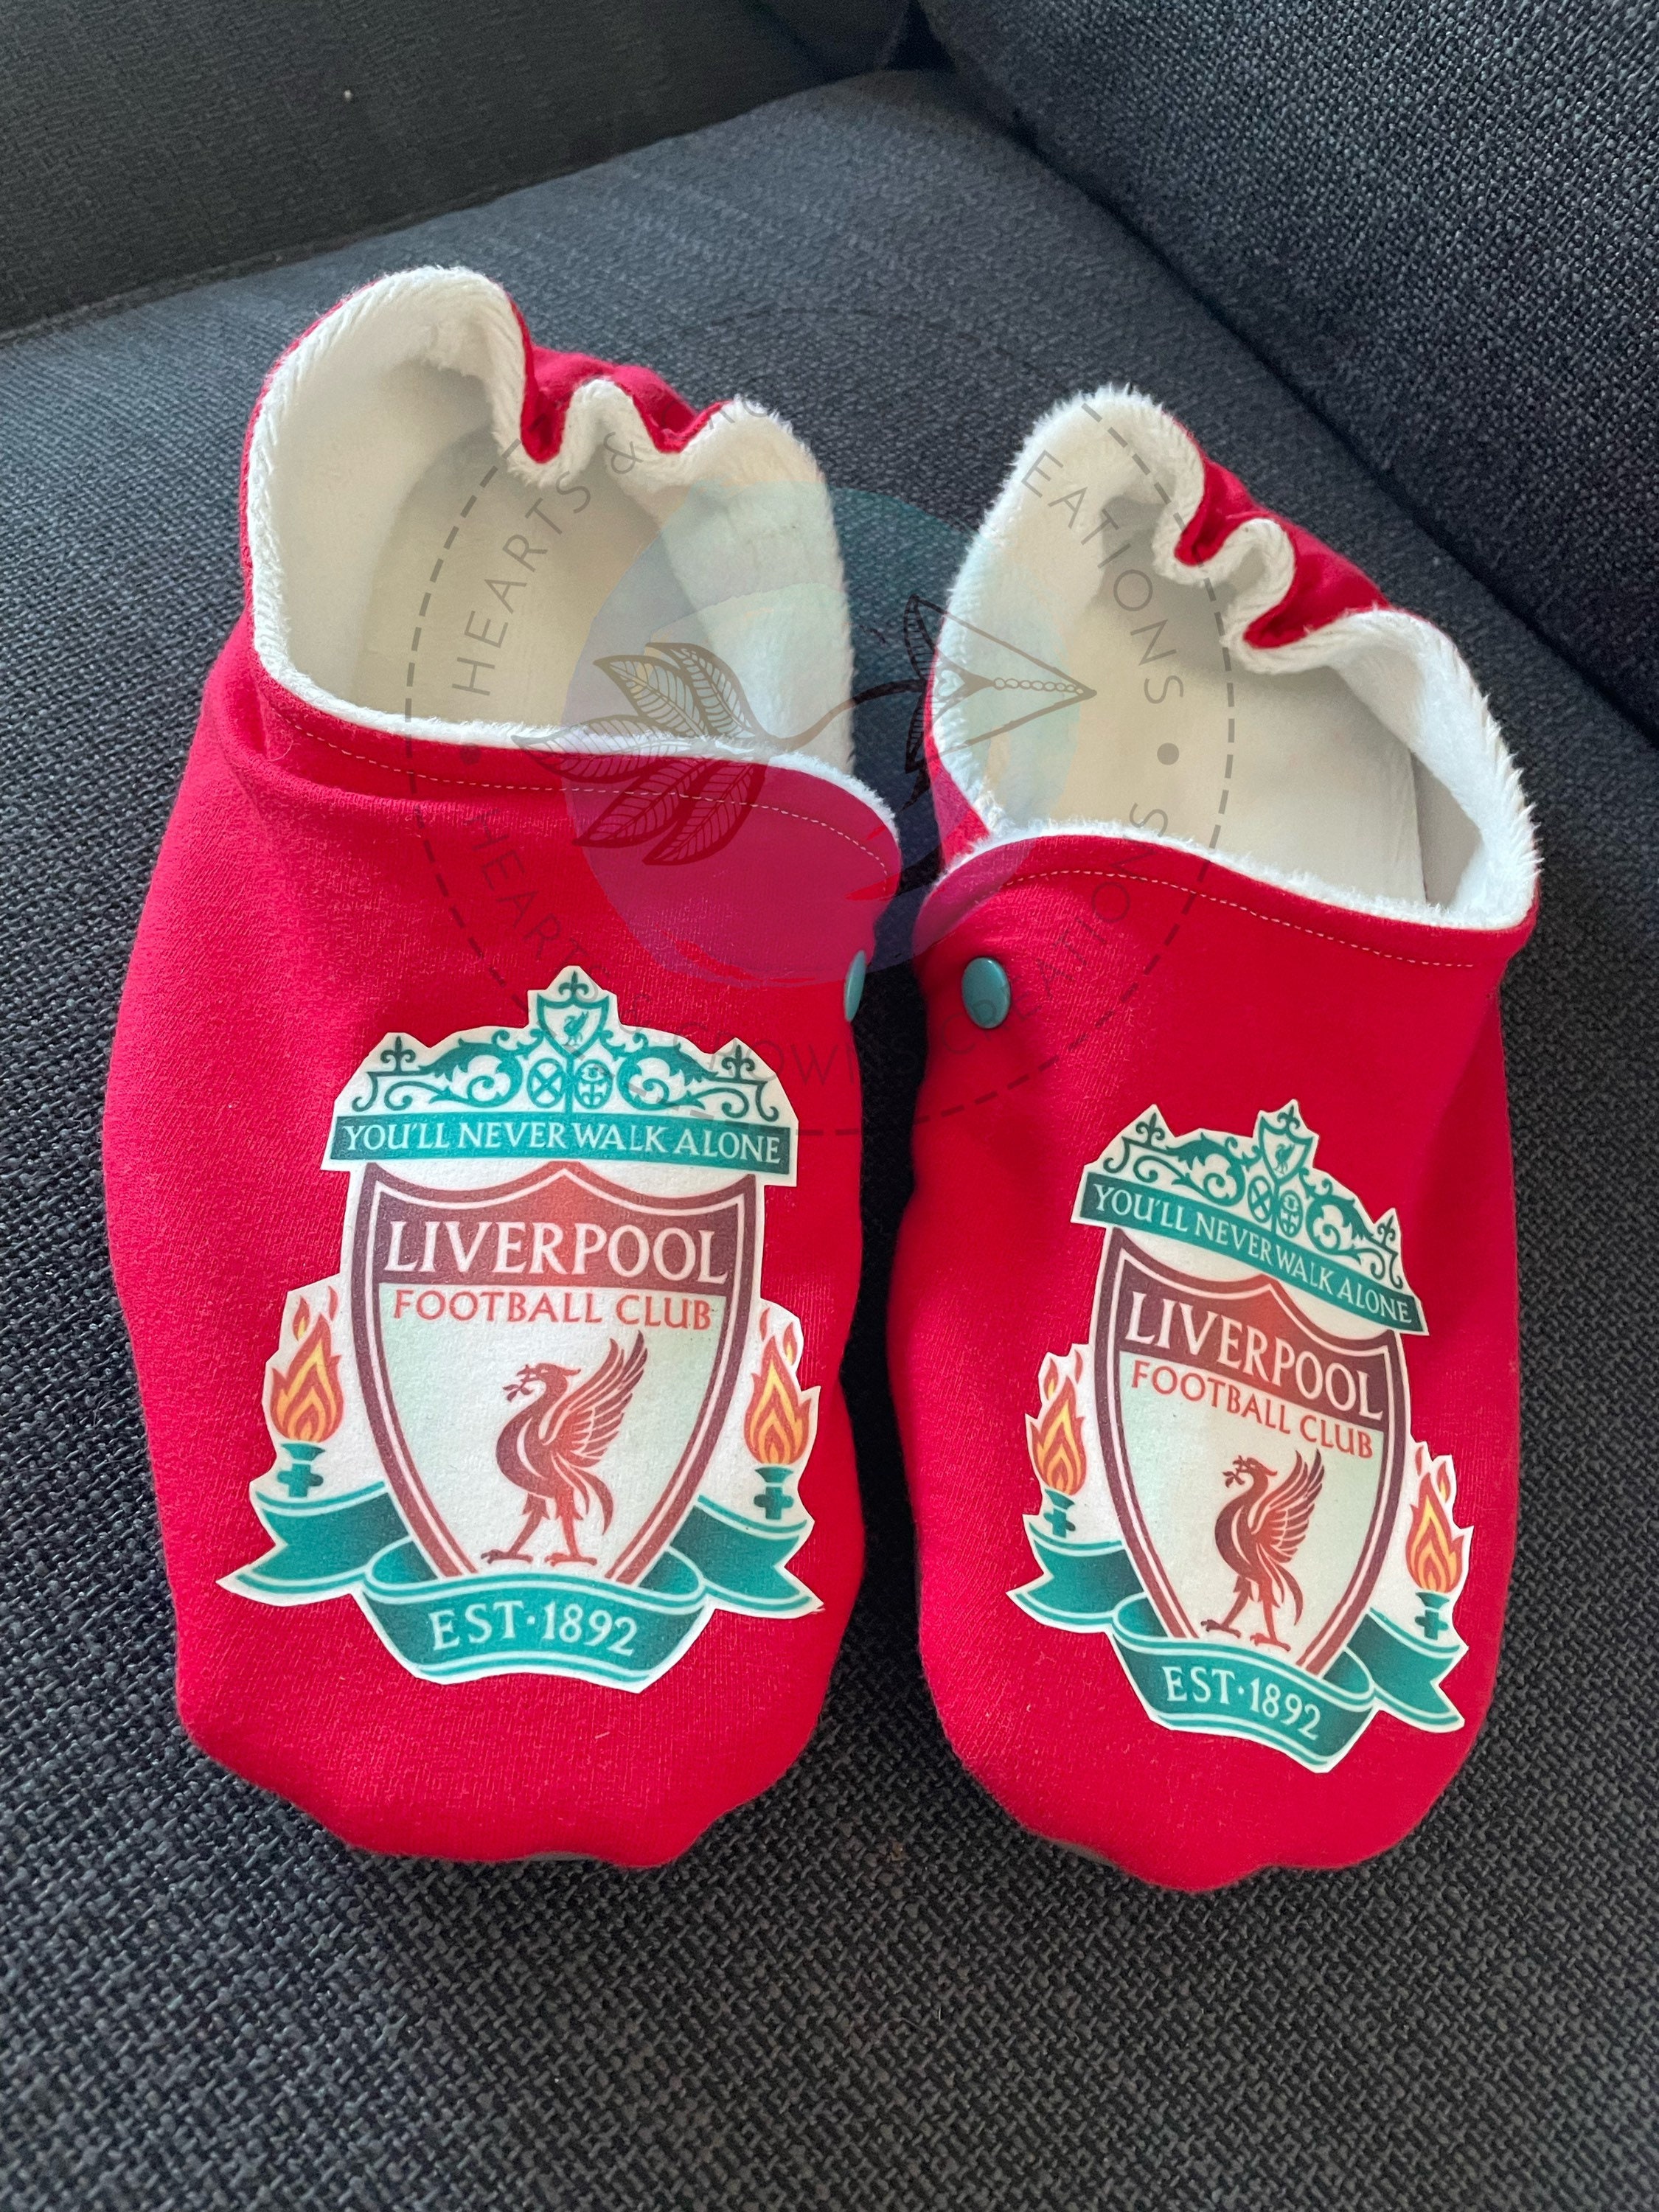 Liverpool Fc Shoes - Etsy